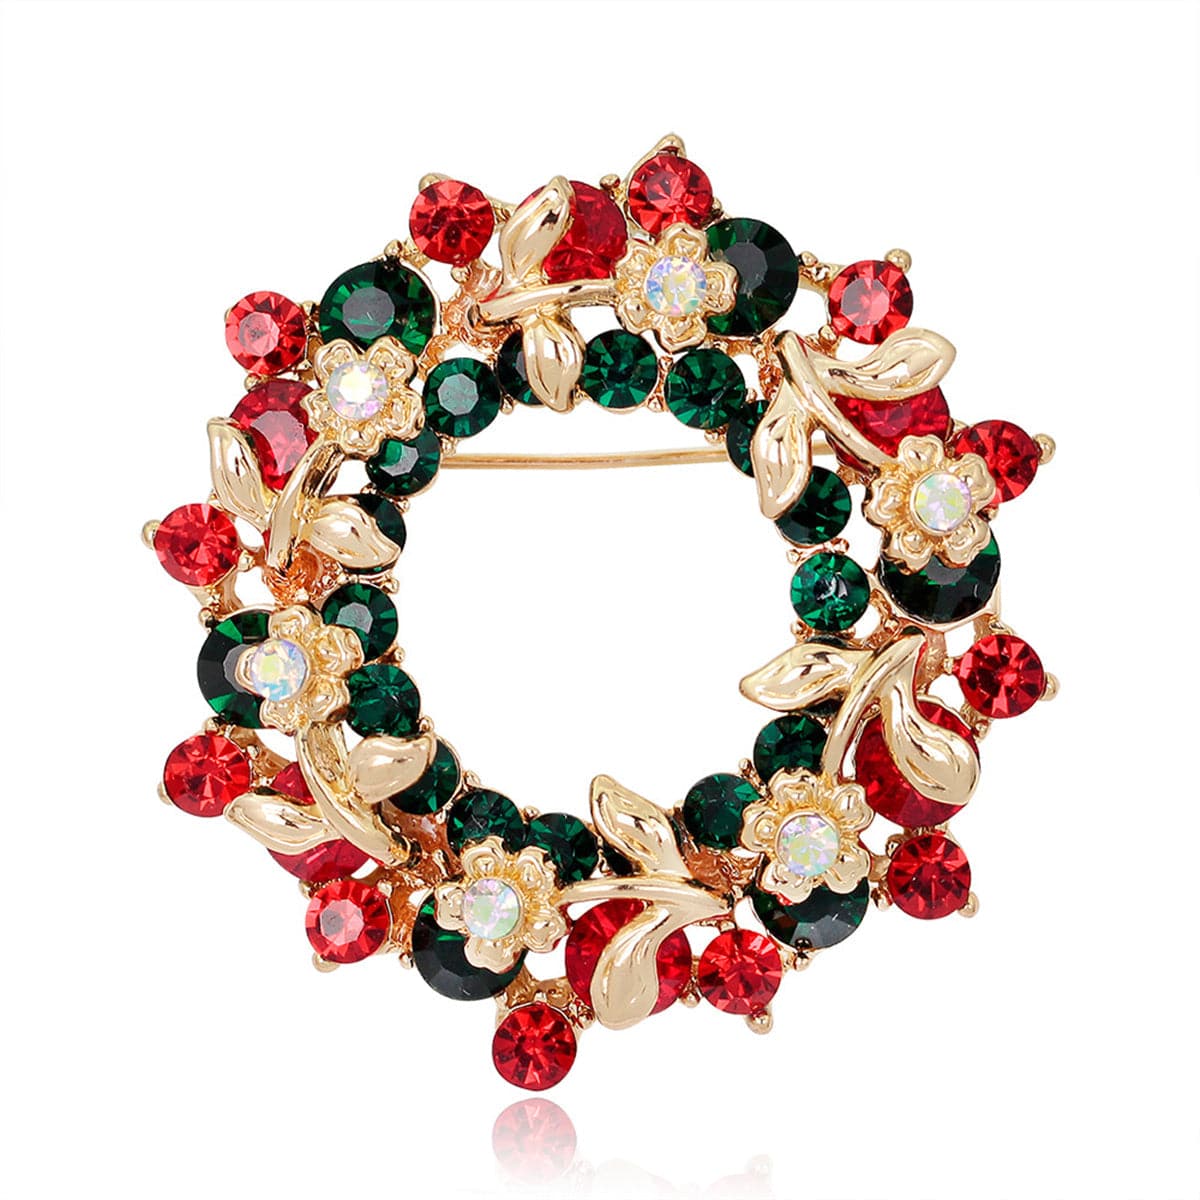 Cubic Zirconia & 18K Gold-Plated Wreath Brooch